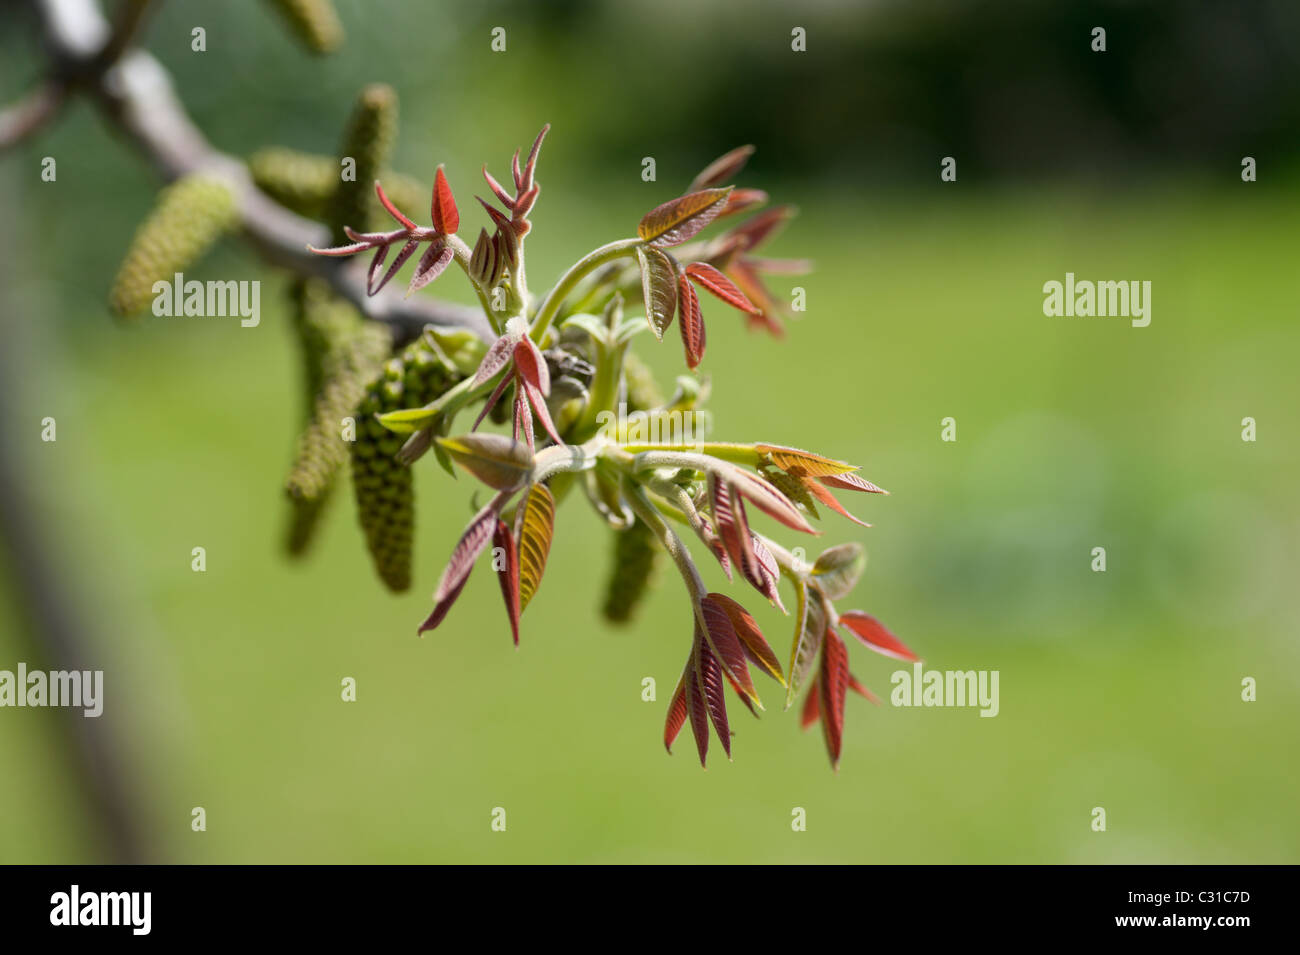 Walnut tree blossoms and shoots close-up detail with shallow DOF, spring season. Stock Photo